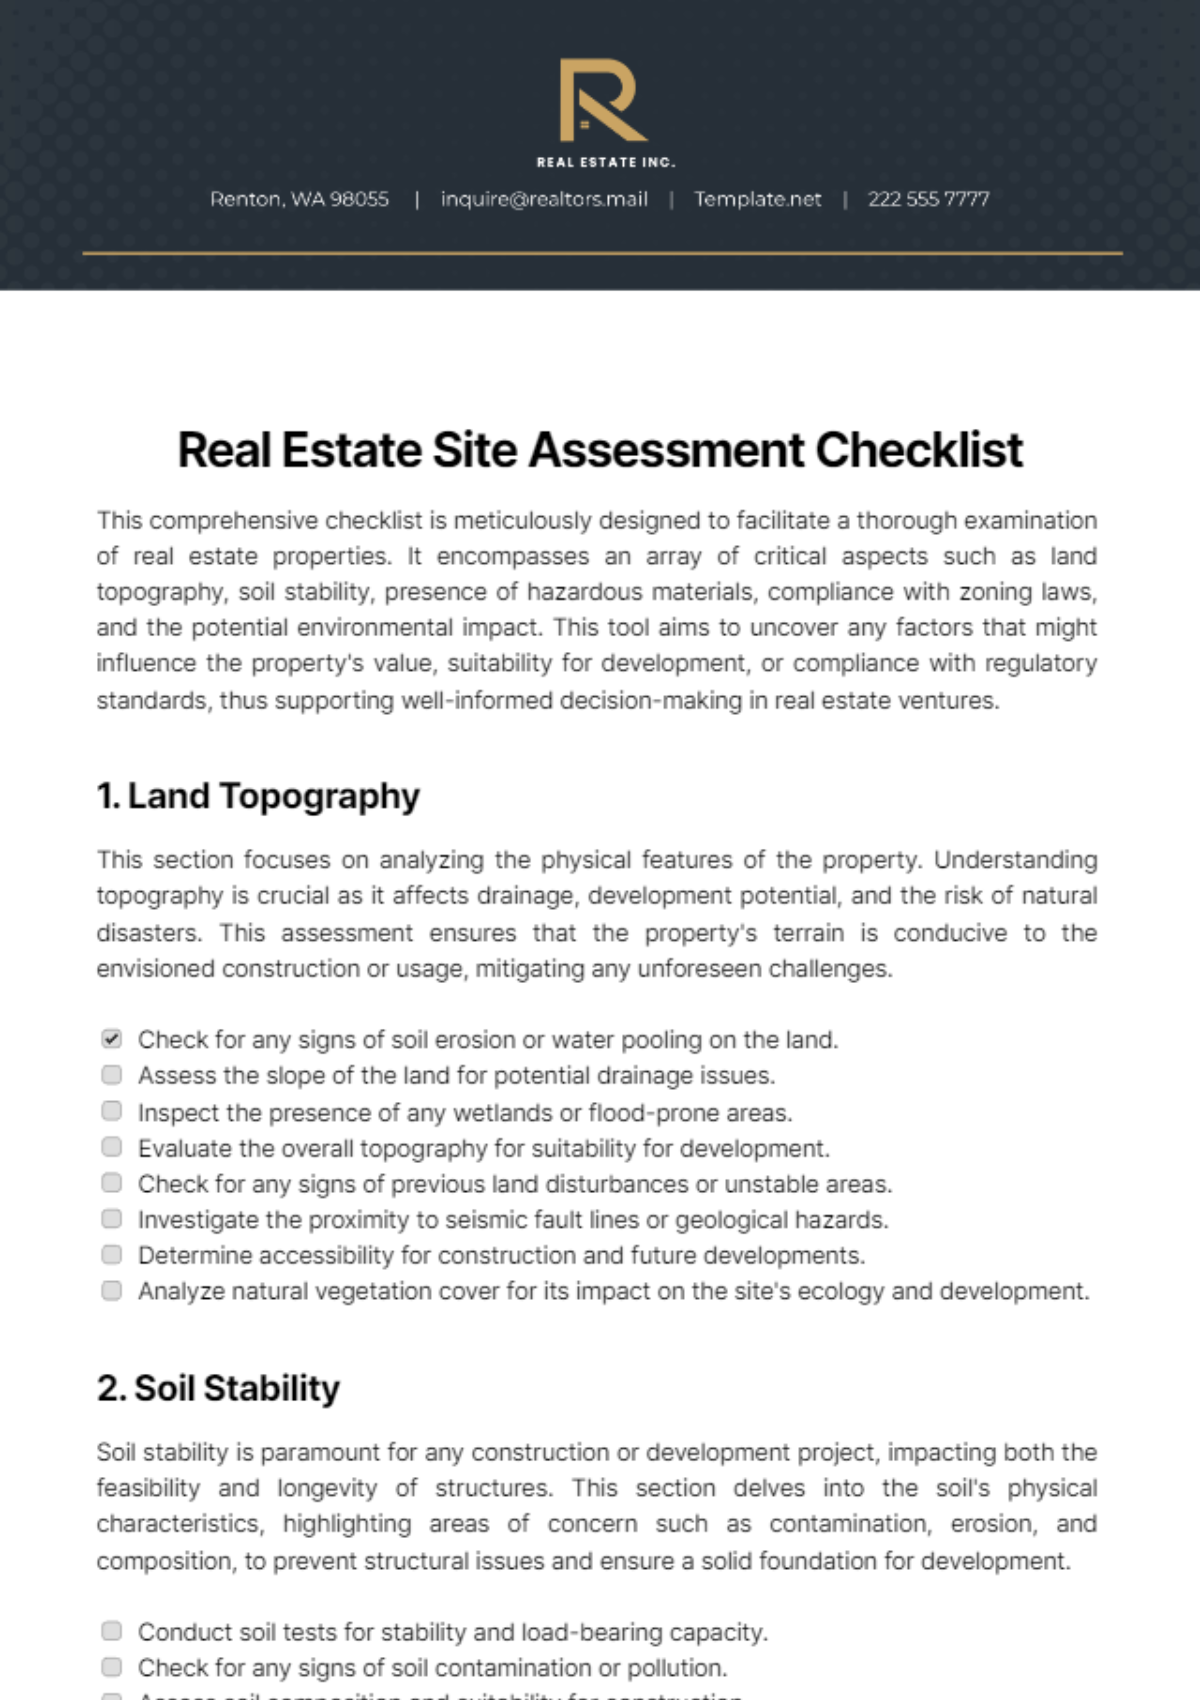 Real Estate Site Assessment Checklist Template